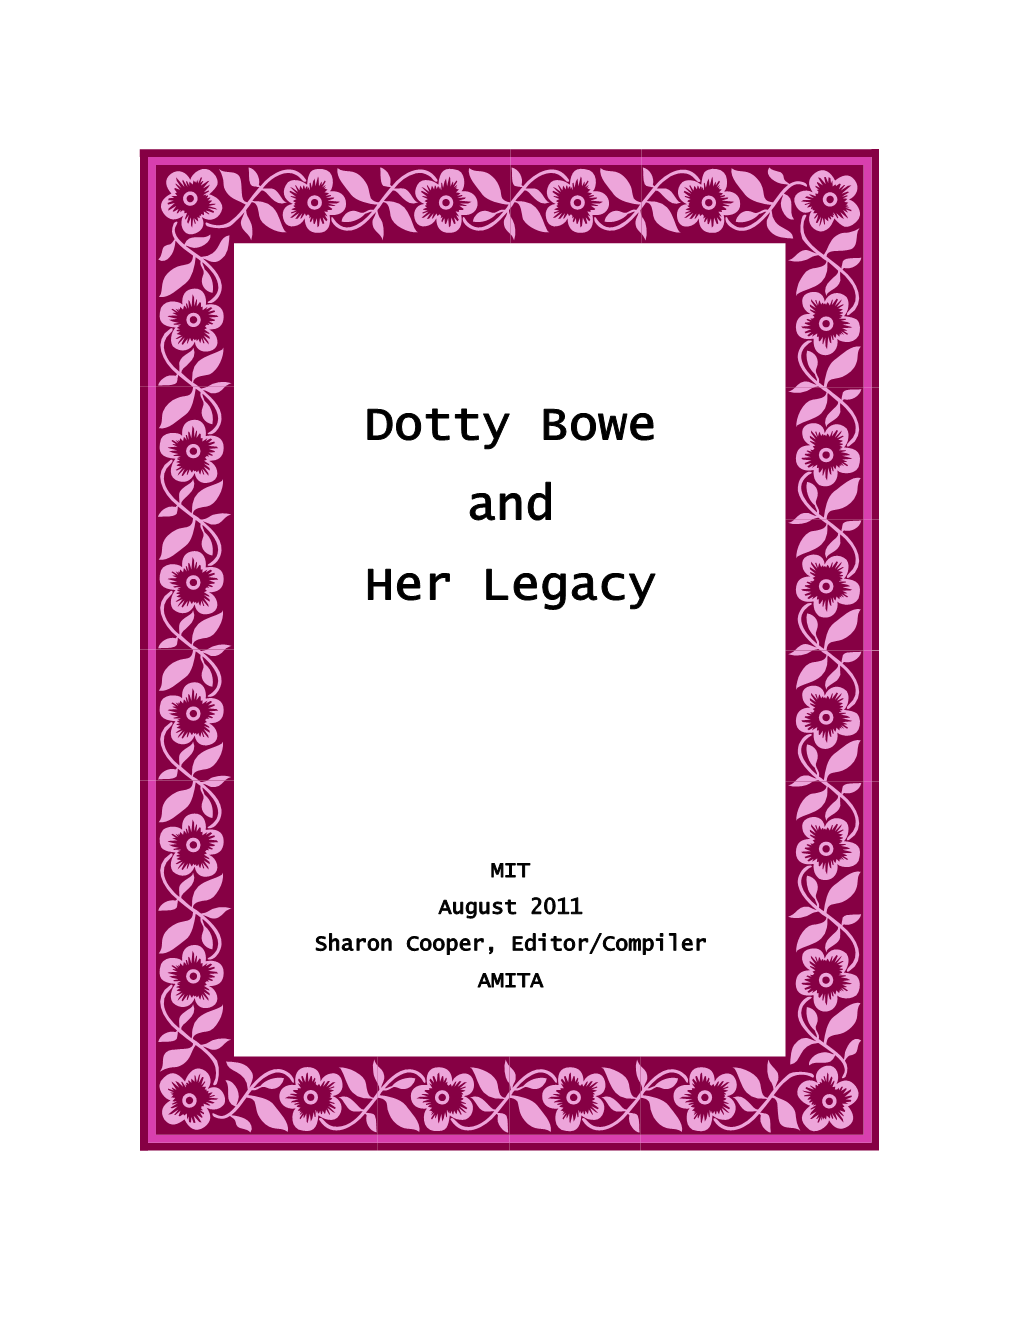 Dotty Bowe and Her Legacy